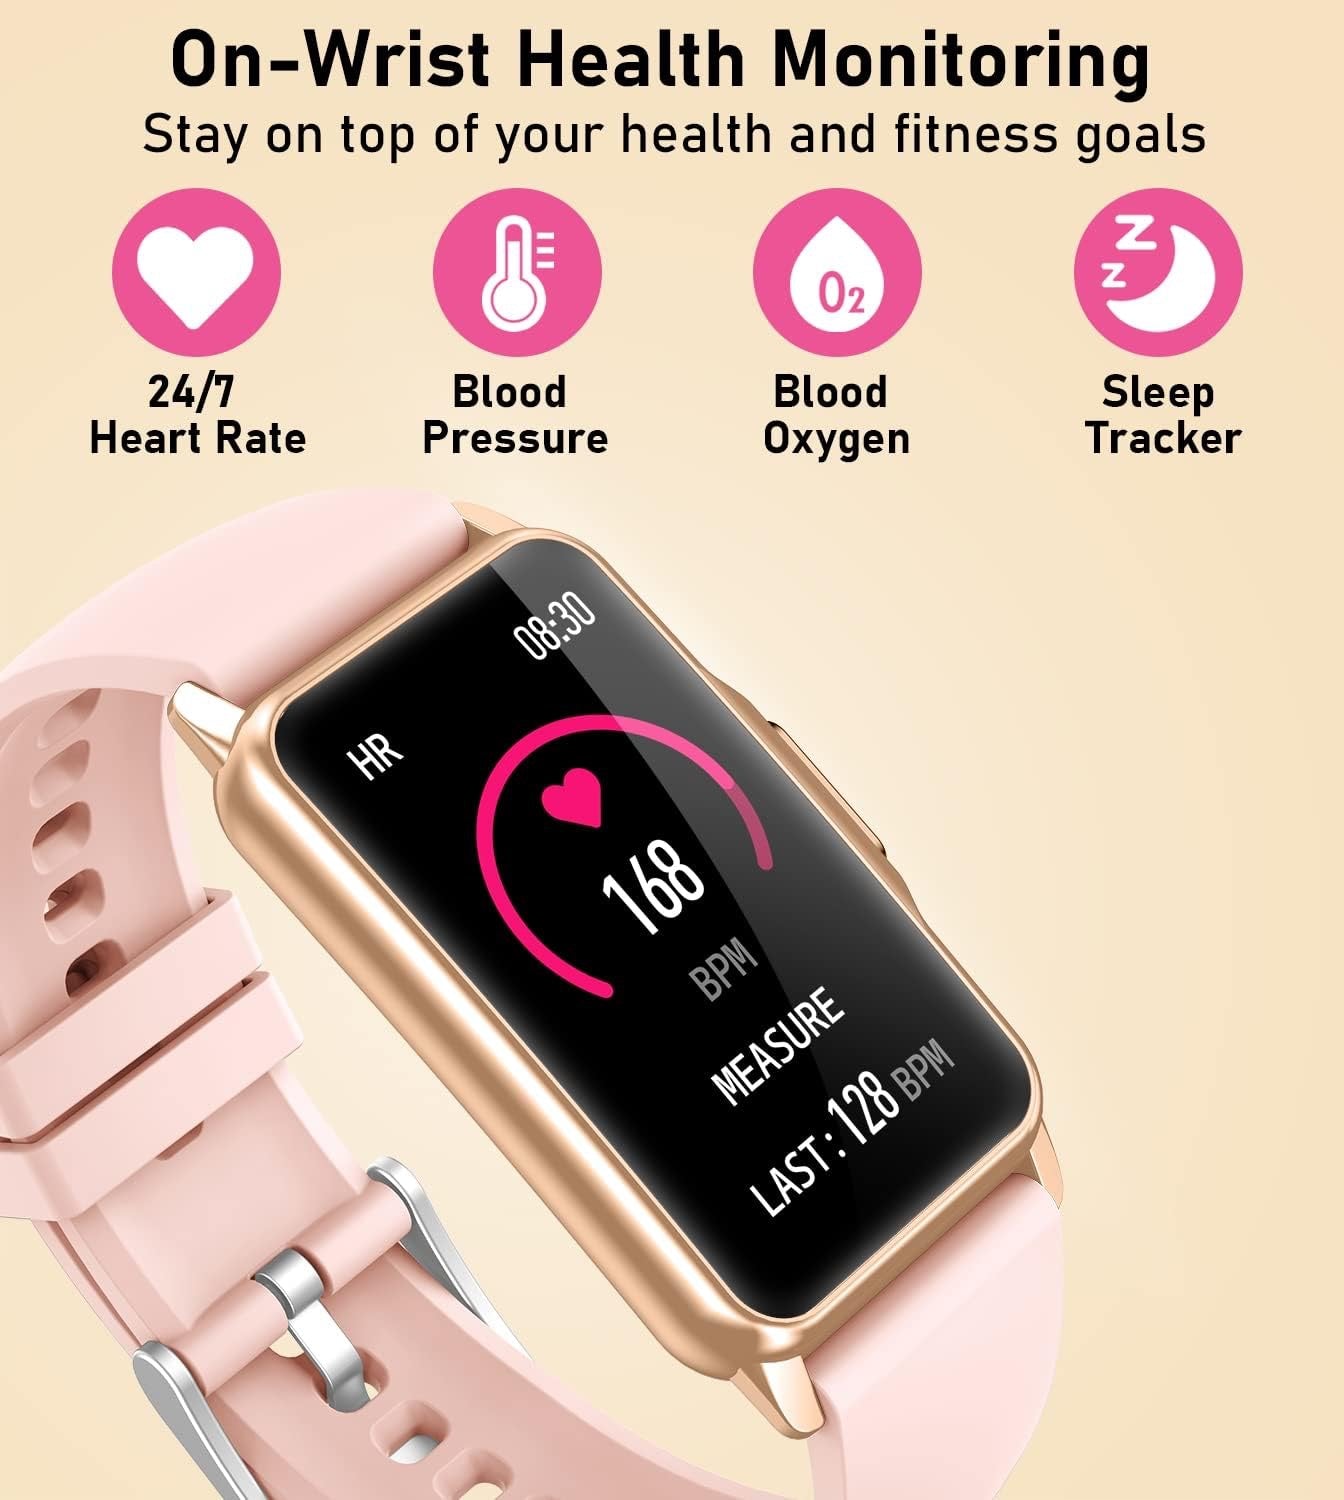 【SACOSDING】Smart Watch Health Fitness Tracker with 24/7 Heart Rate, Blood Oxygen Blood Pressure Sleep Monitor, 115 Sports Modes, Step Calorie Counter Pedometer IP68 Waterproof for Android and iPhone Women Men